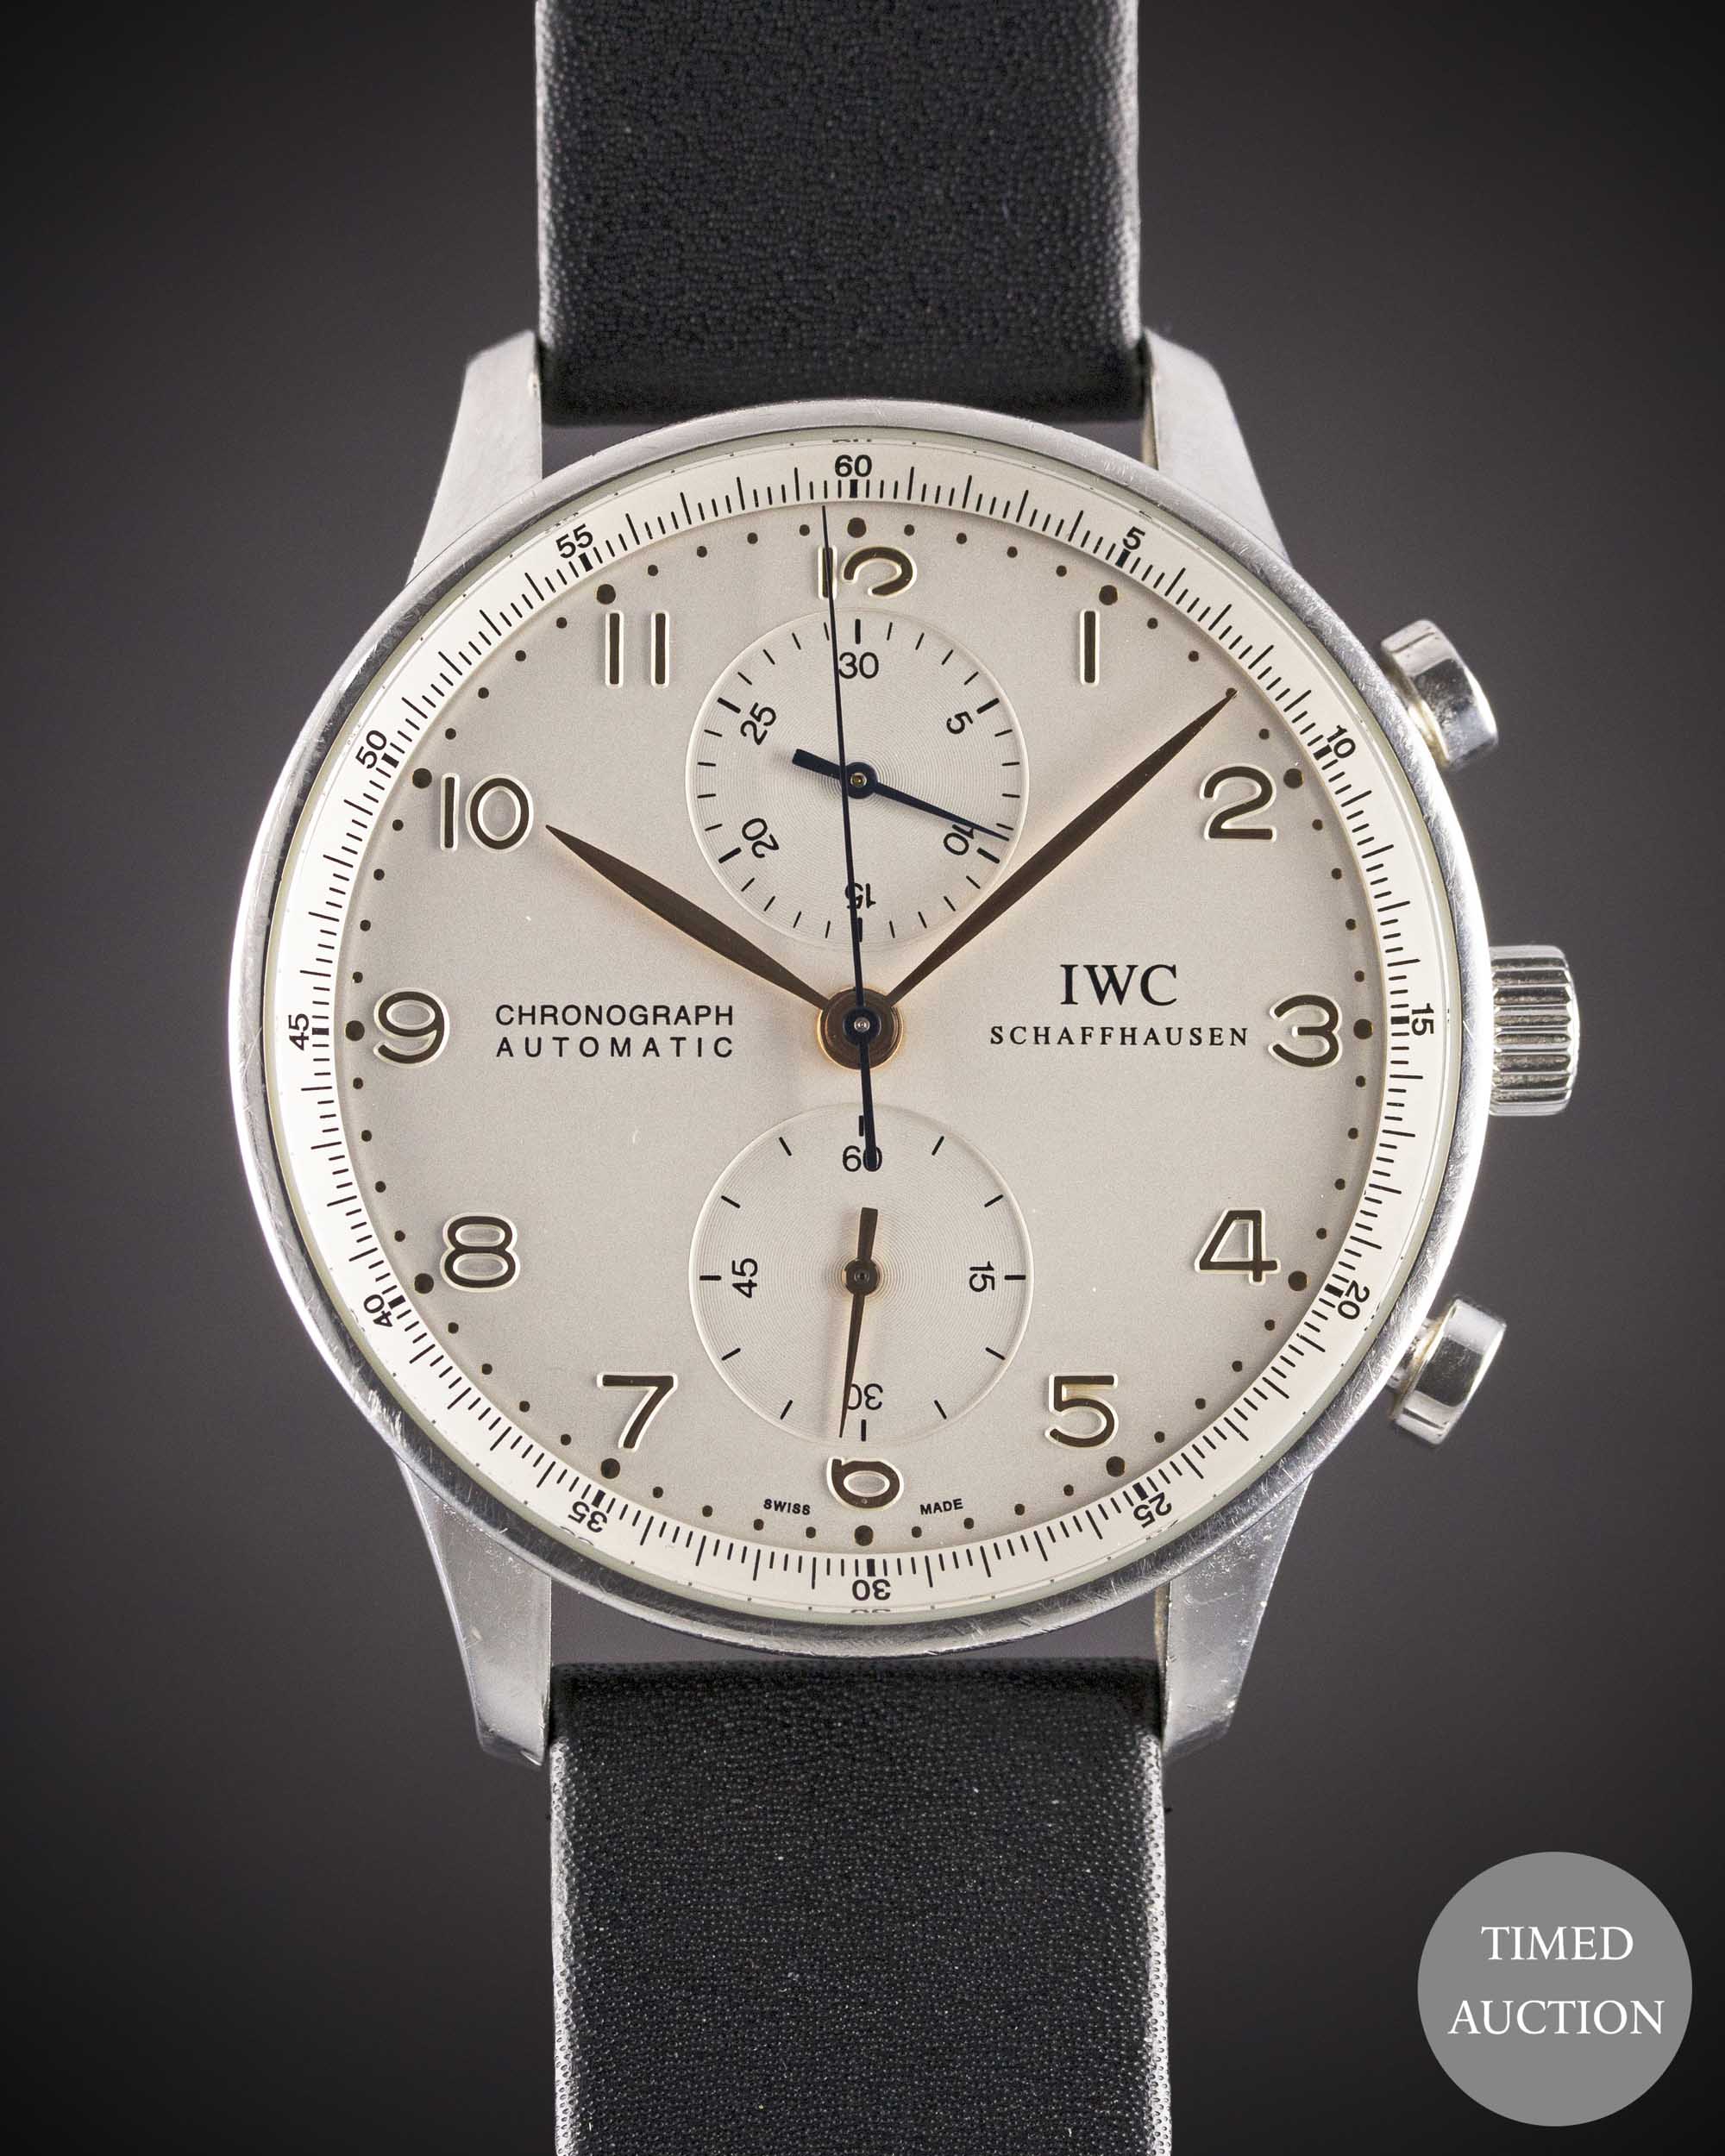 A GENTLEMAN'S STAINLESS STEEL IWC PORTUGUESE AUTOMATIC CHRONOGRAPH WRIST WATCH DATED 2007, REF.